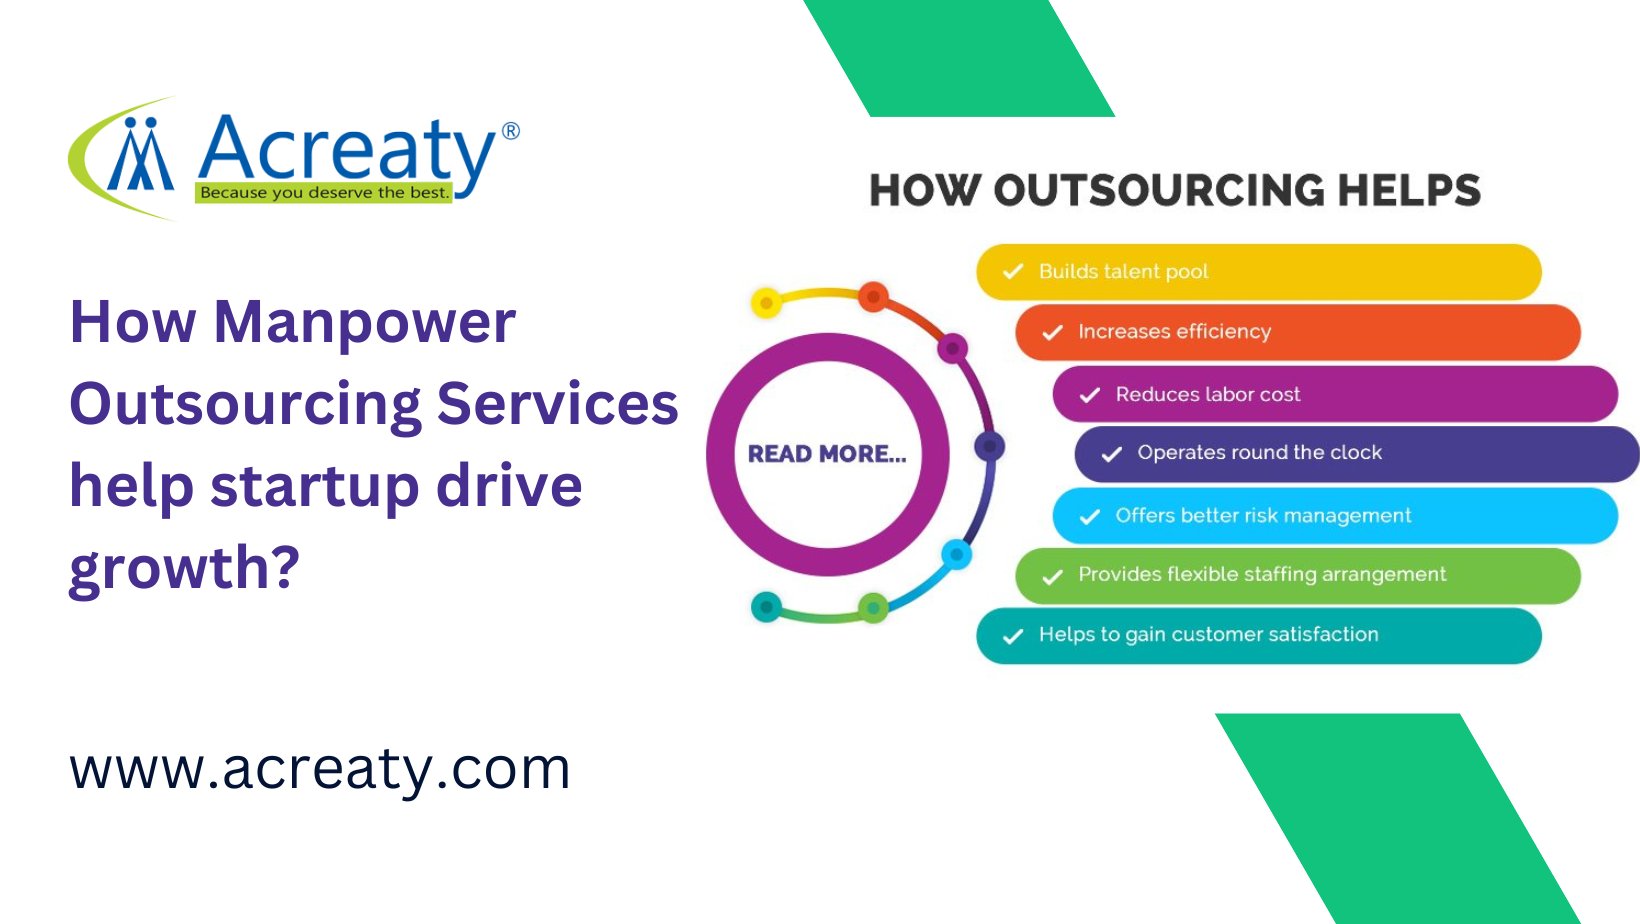 How Manpower Outsourcing Services help startup drive growth?